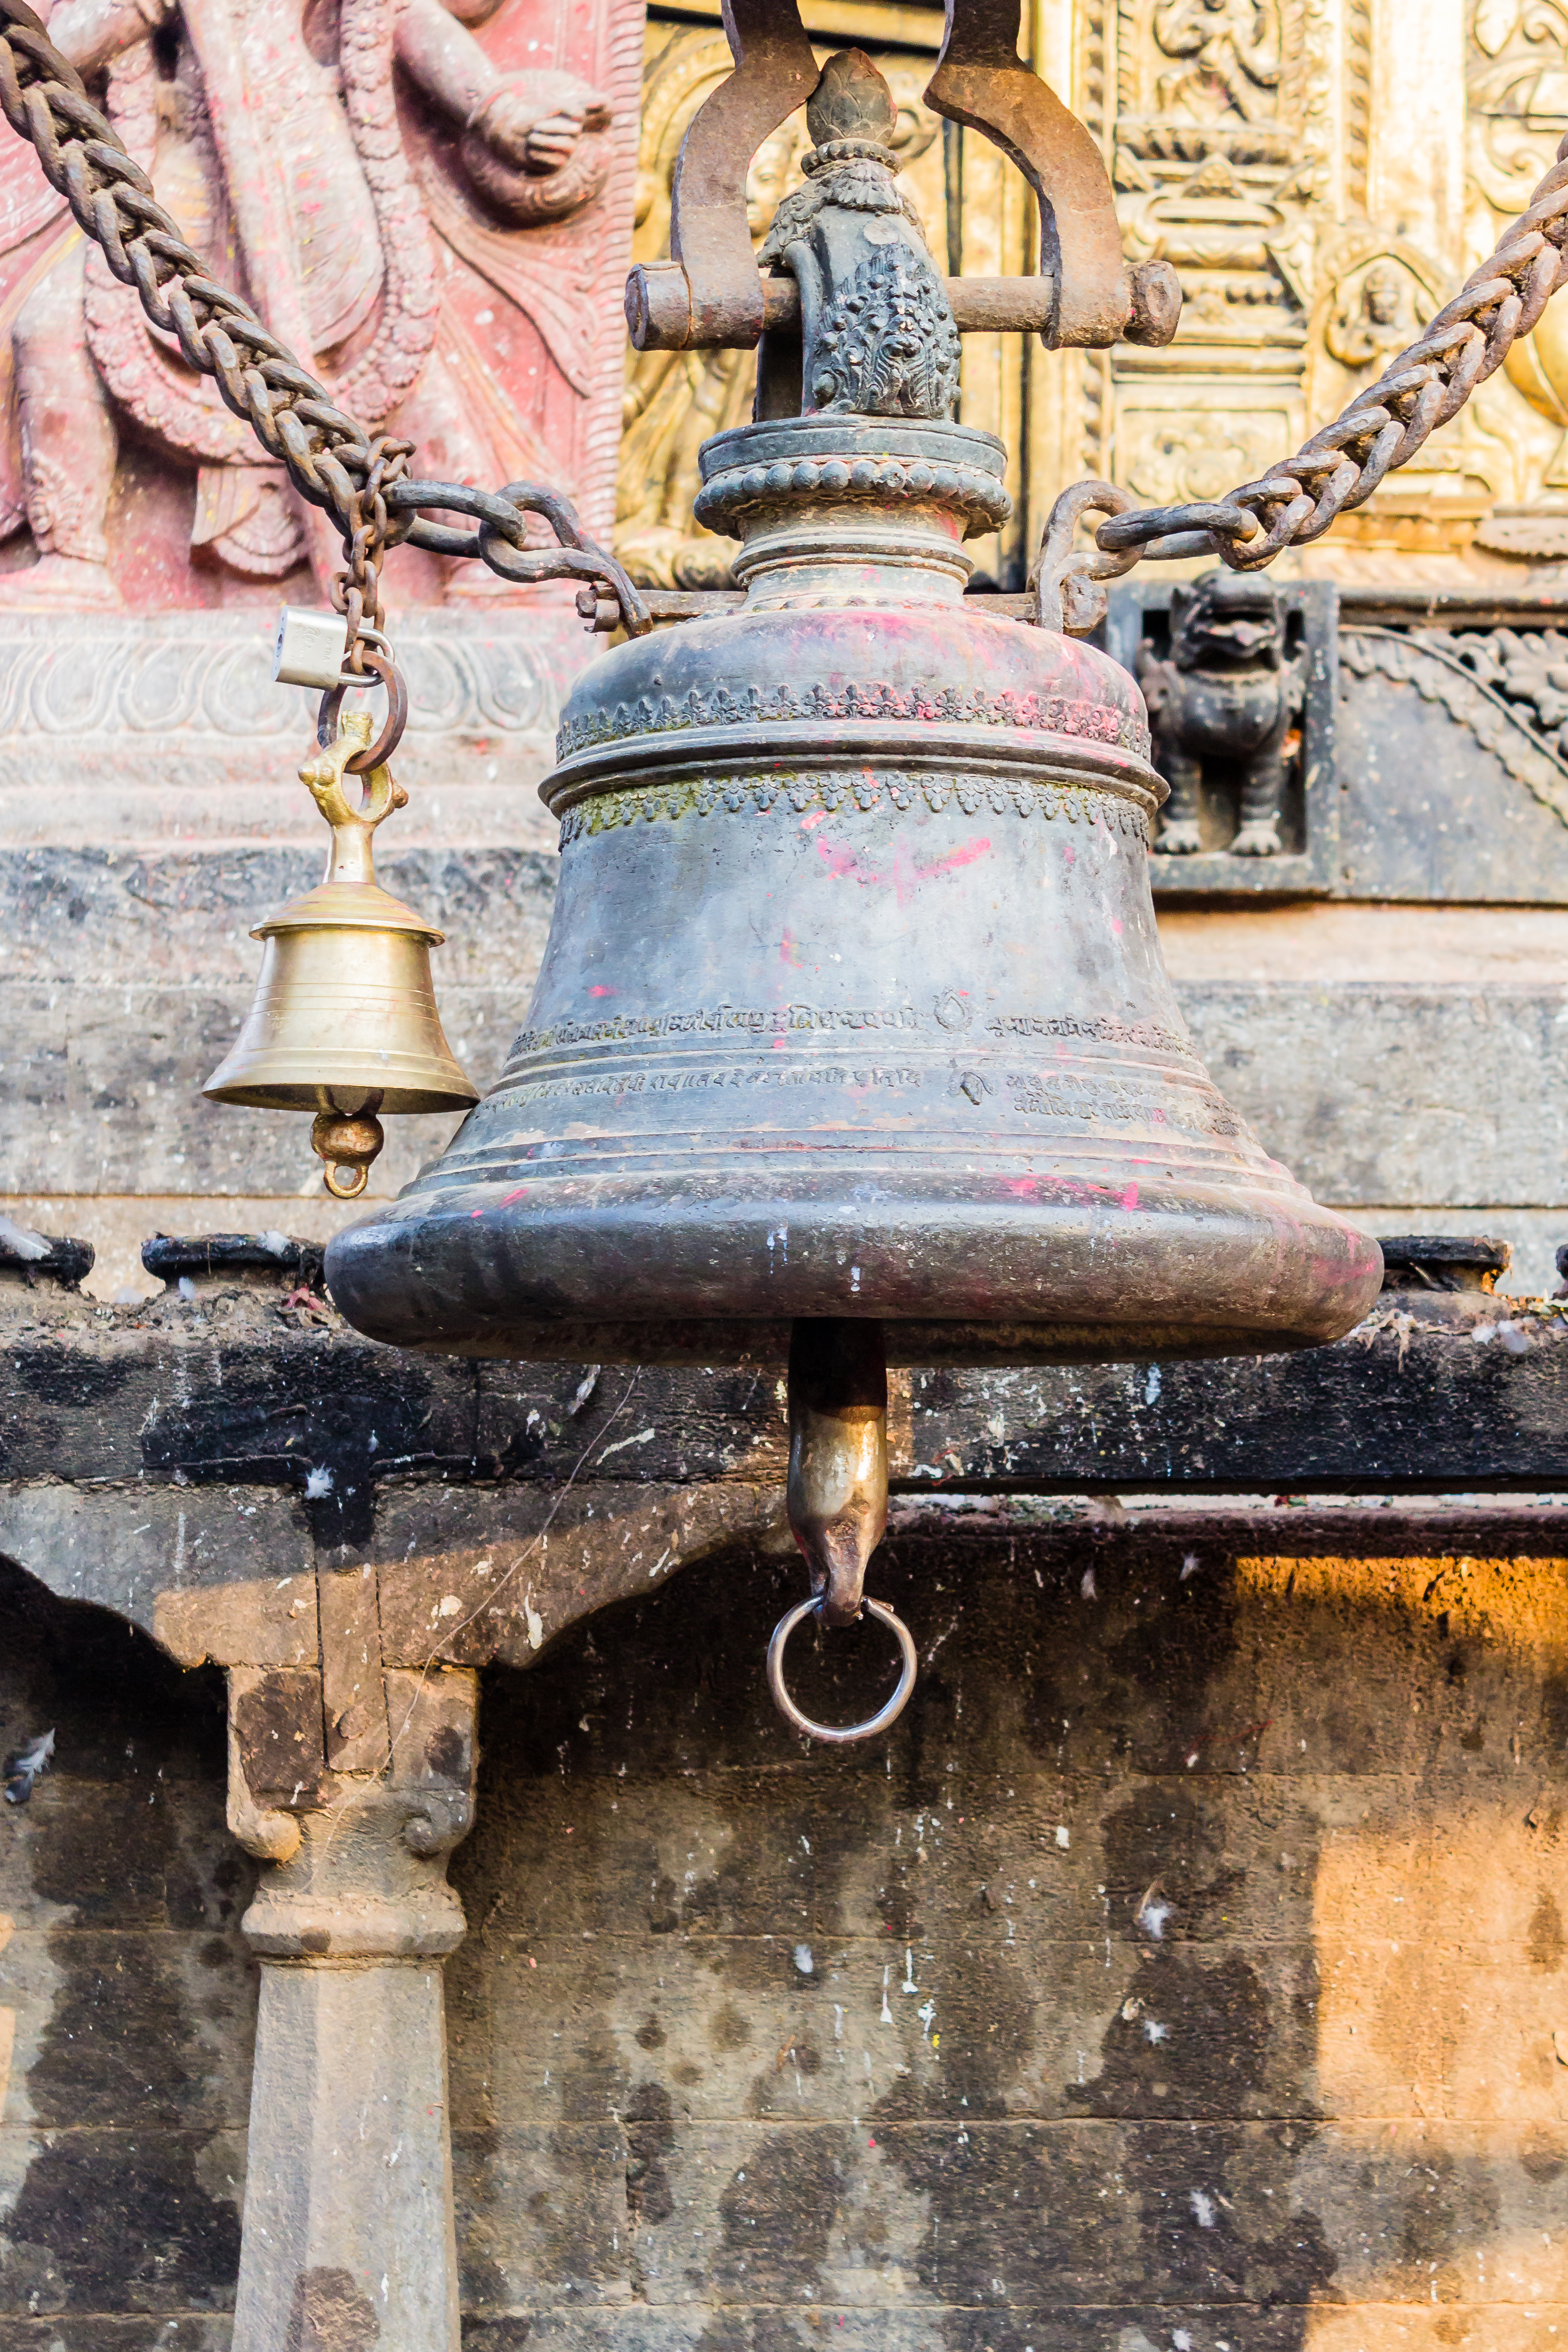 What Is A Bell Ringer Activity? - Lesson | Study.com